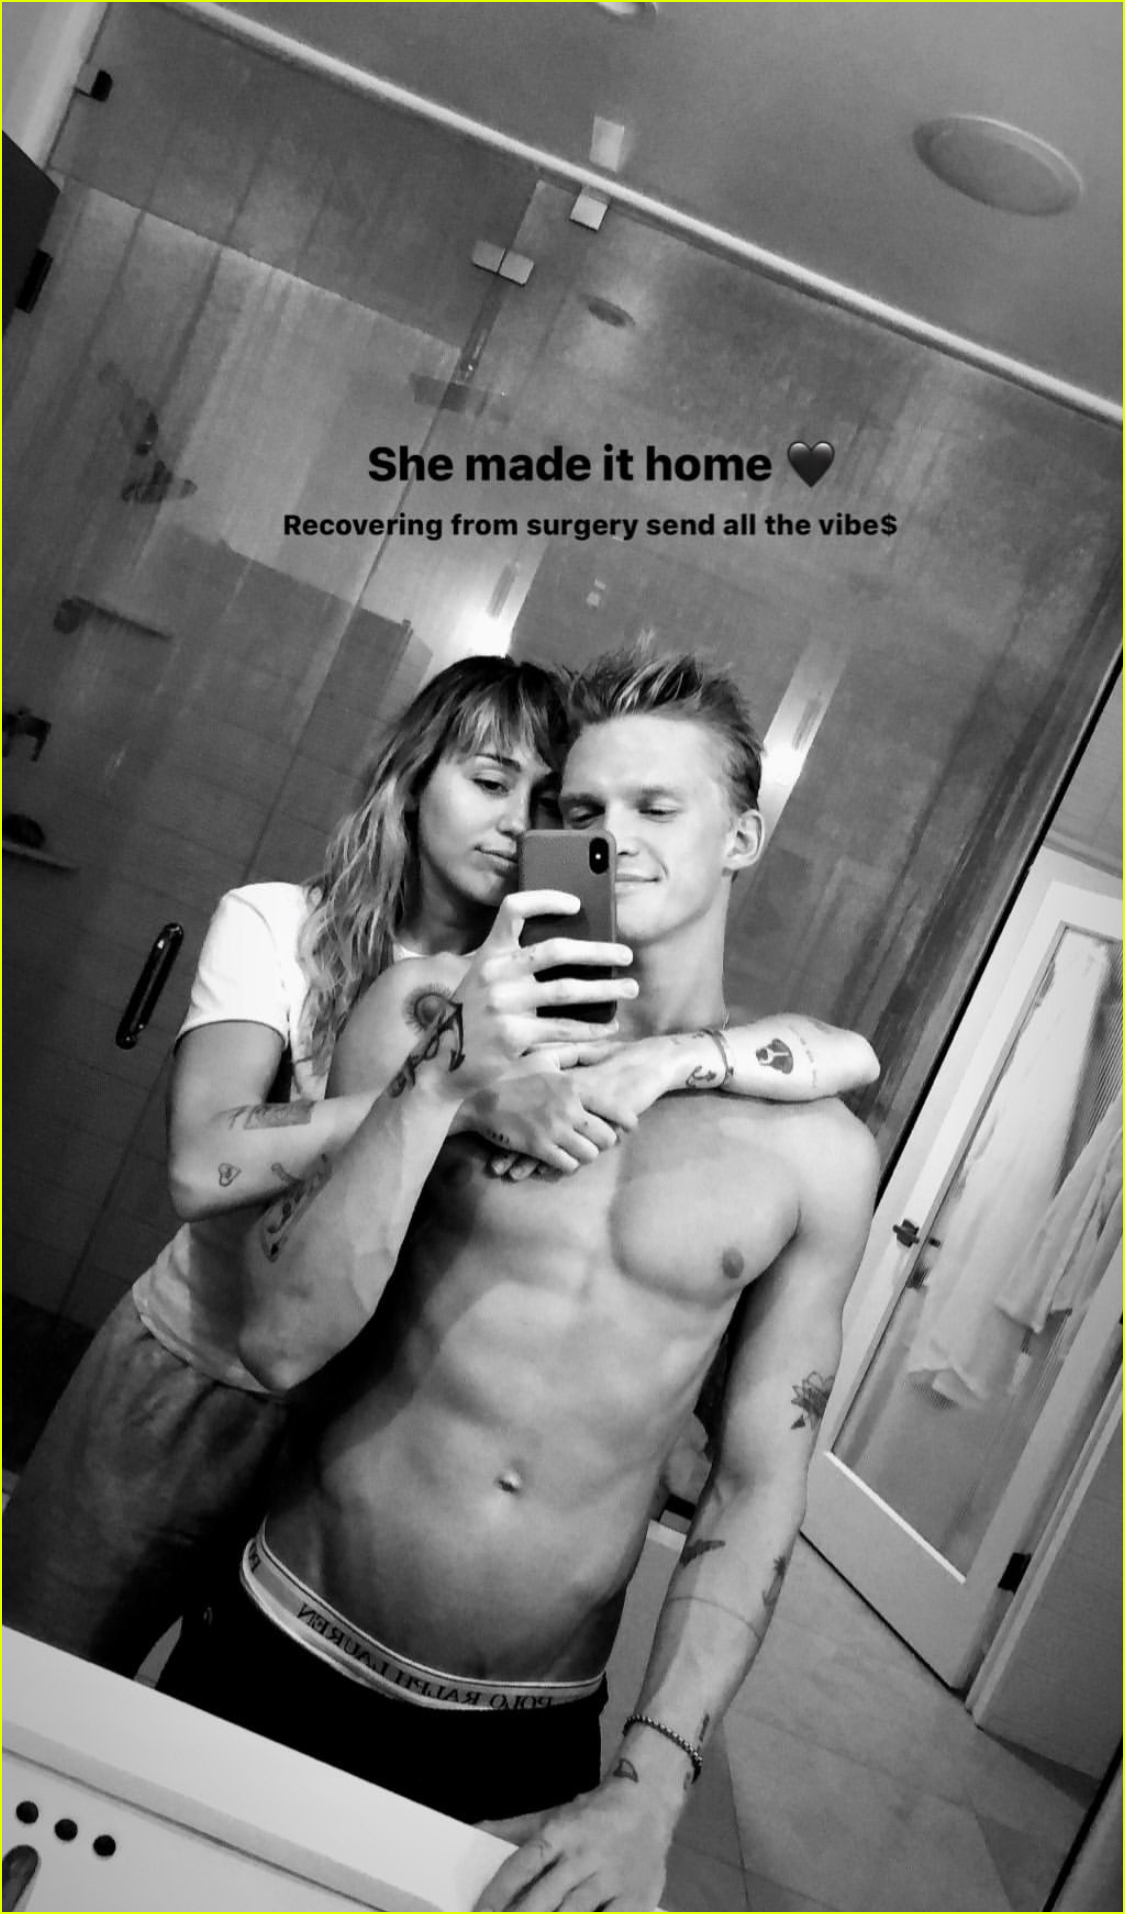 miley cyrus shares shirtless cody simpson after being released from hospital